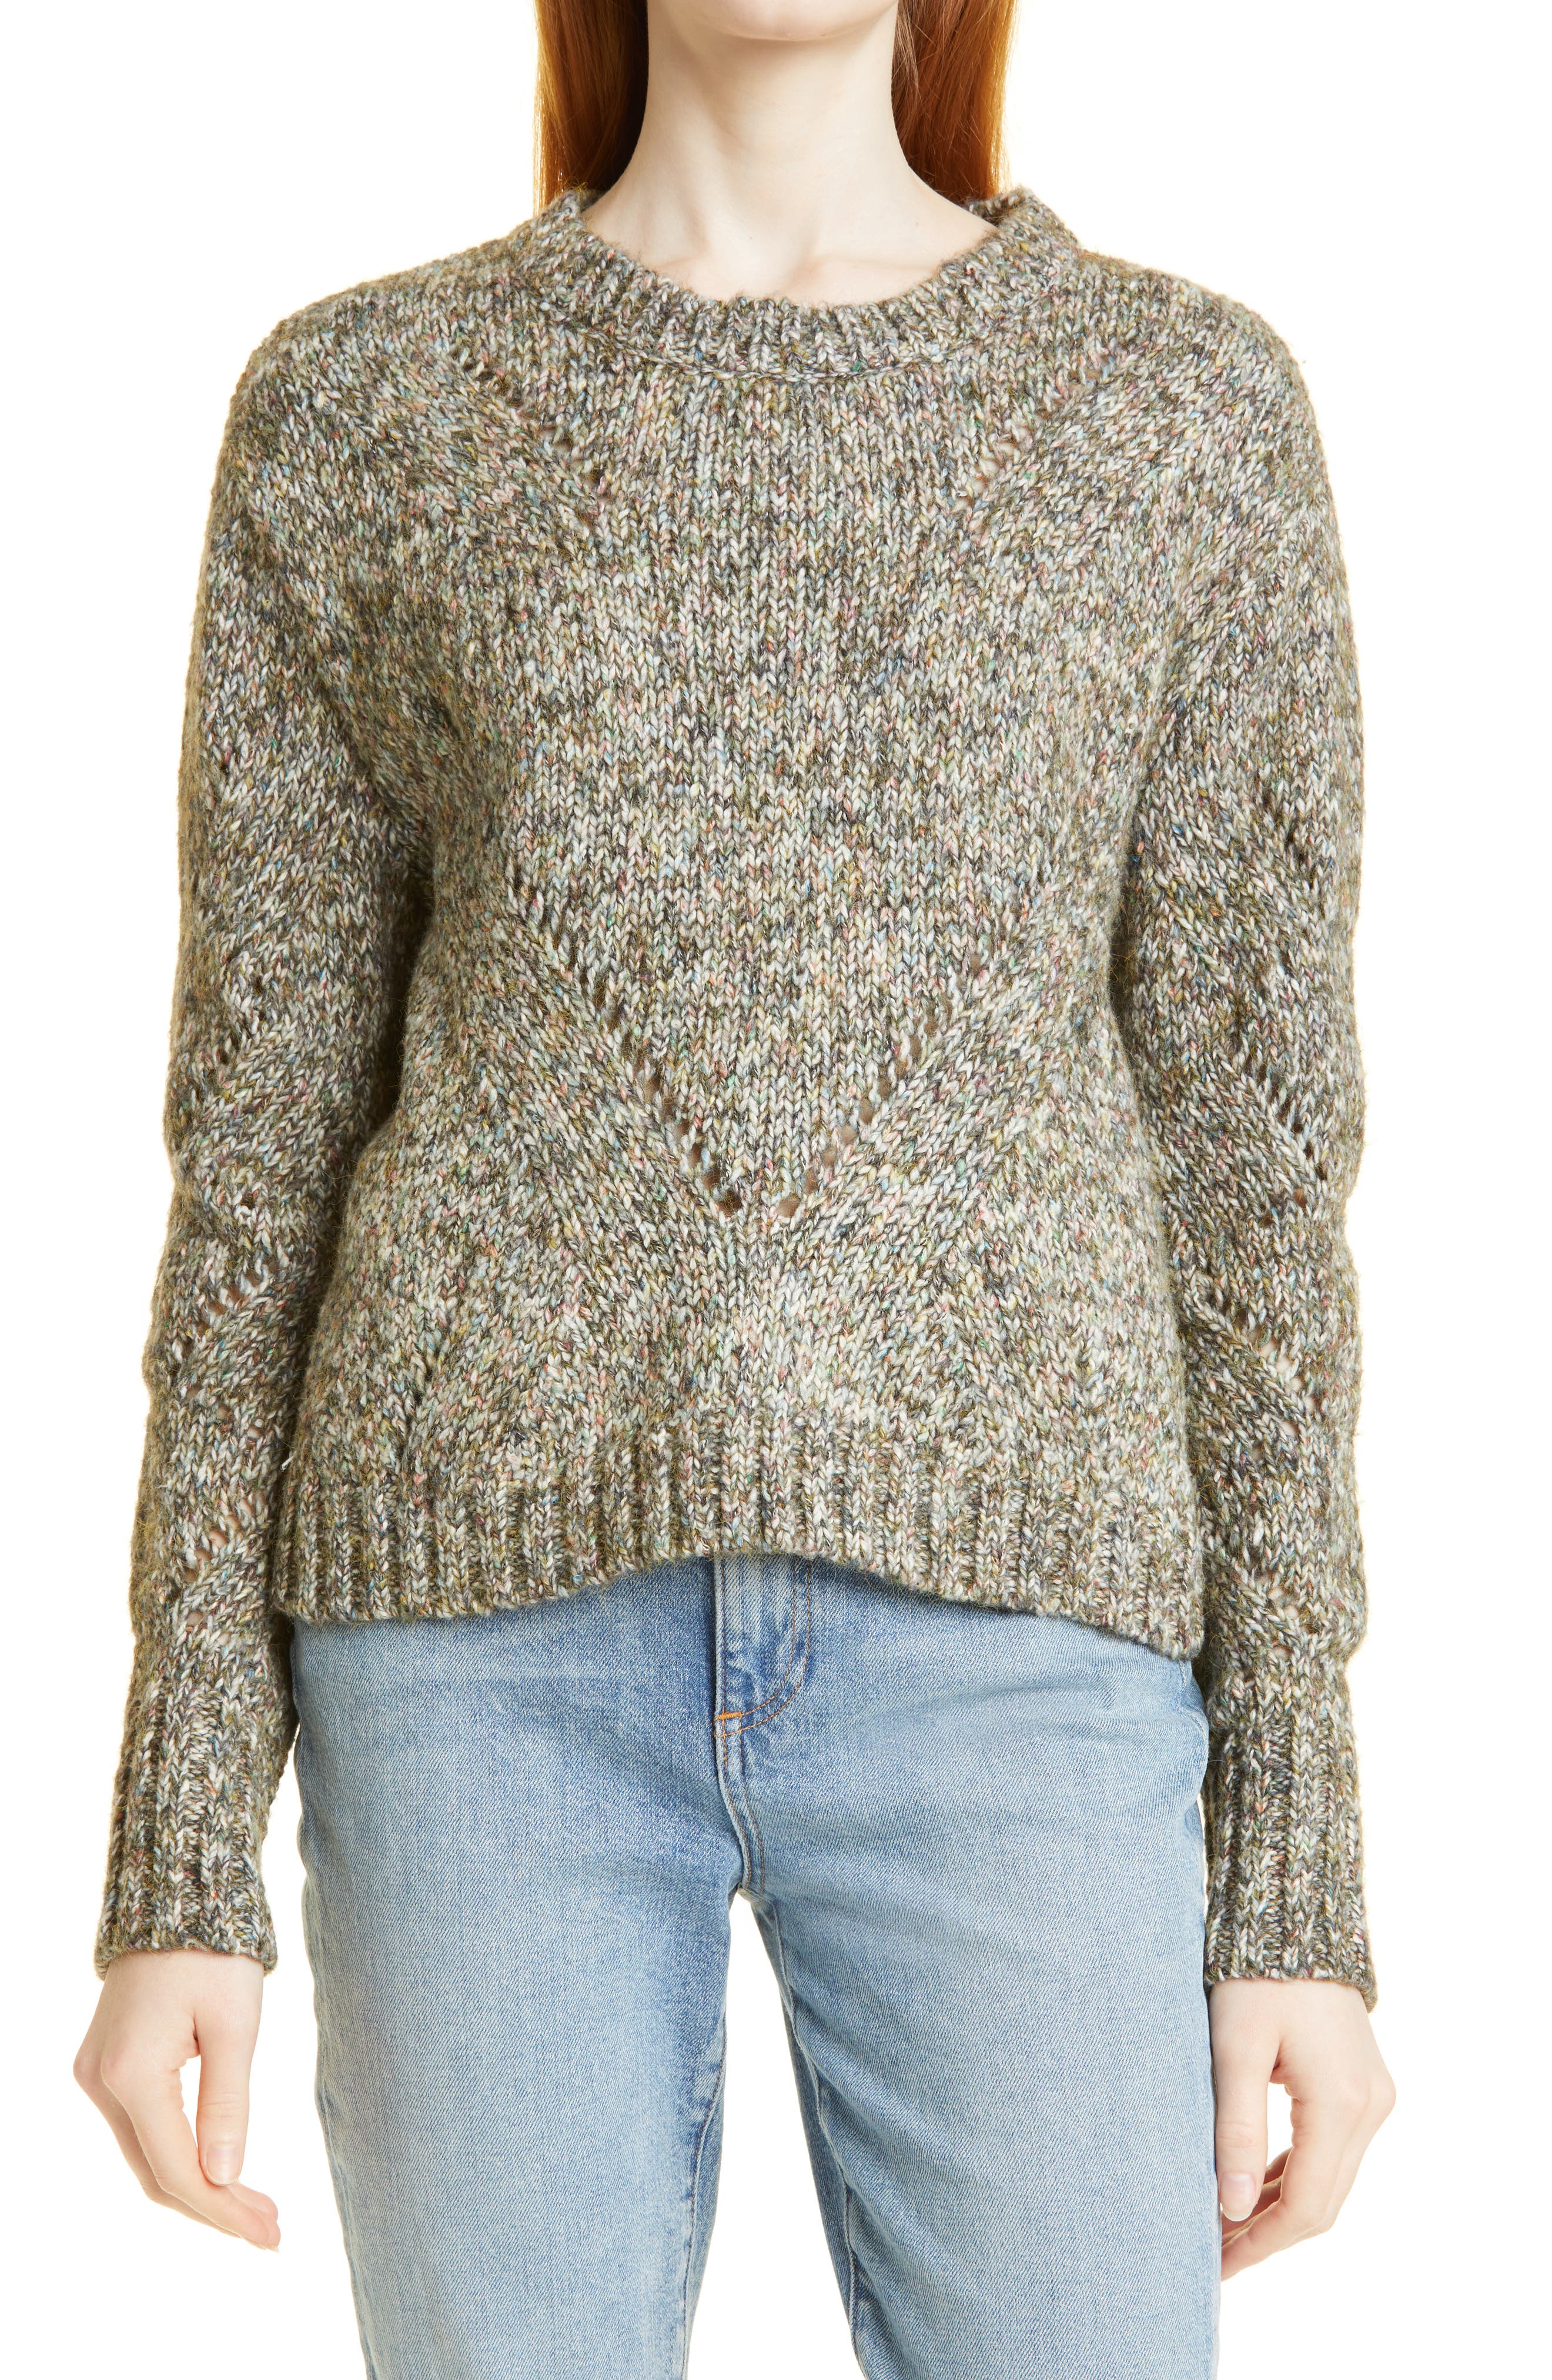 LINE & LABEL Remi Sweater in Myriad at Nordstrom